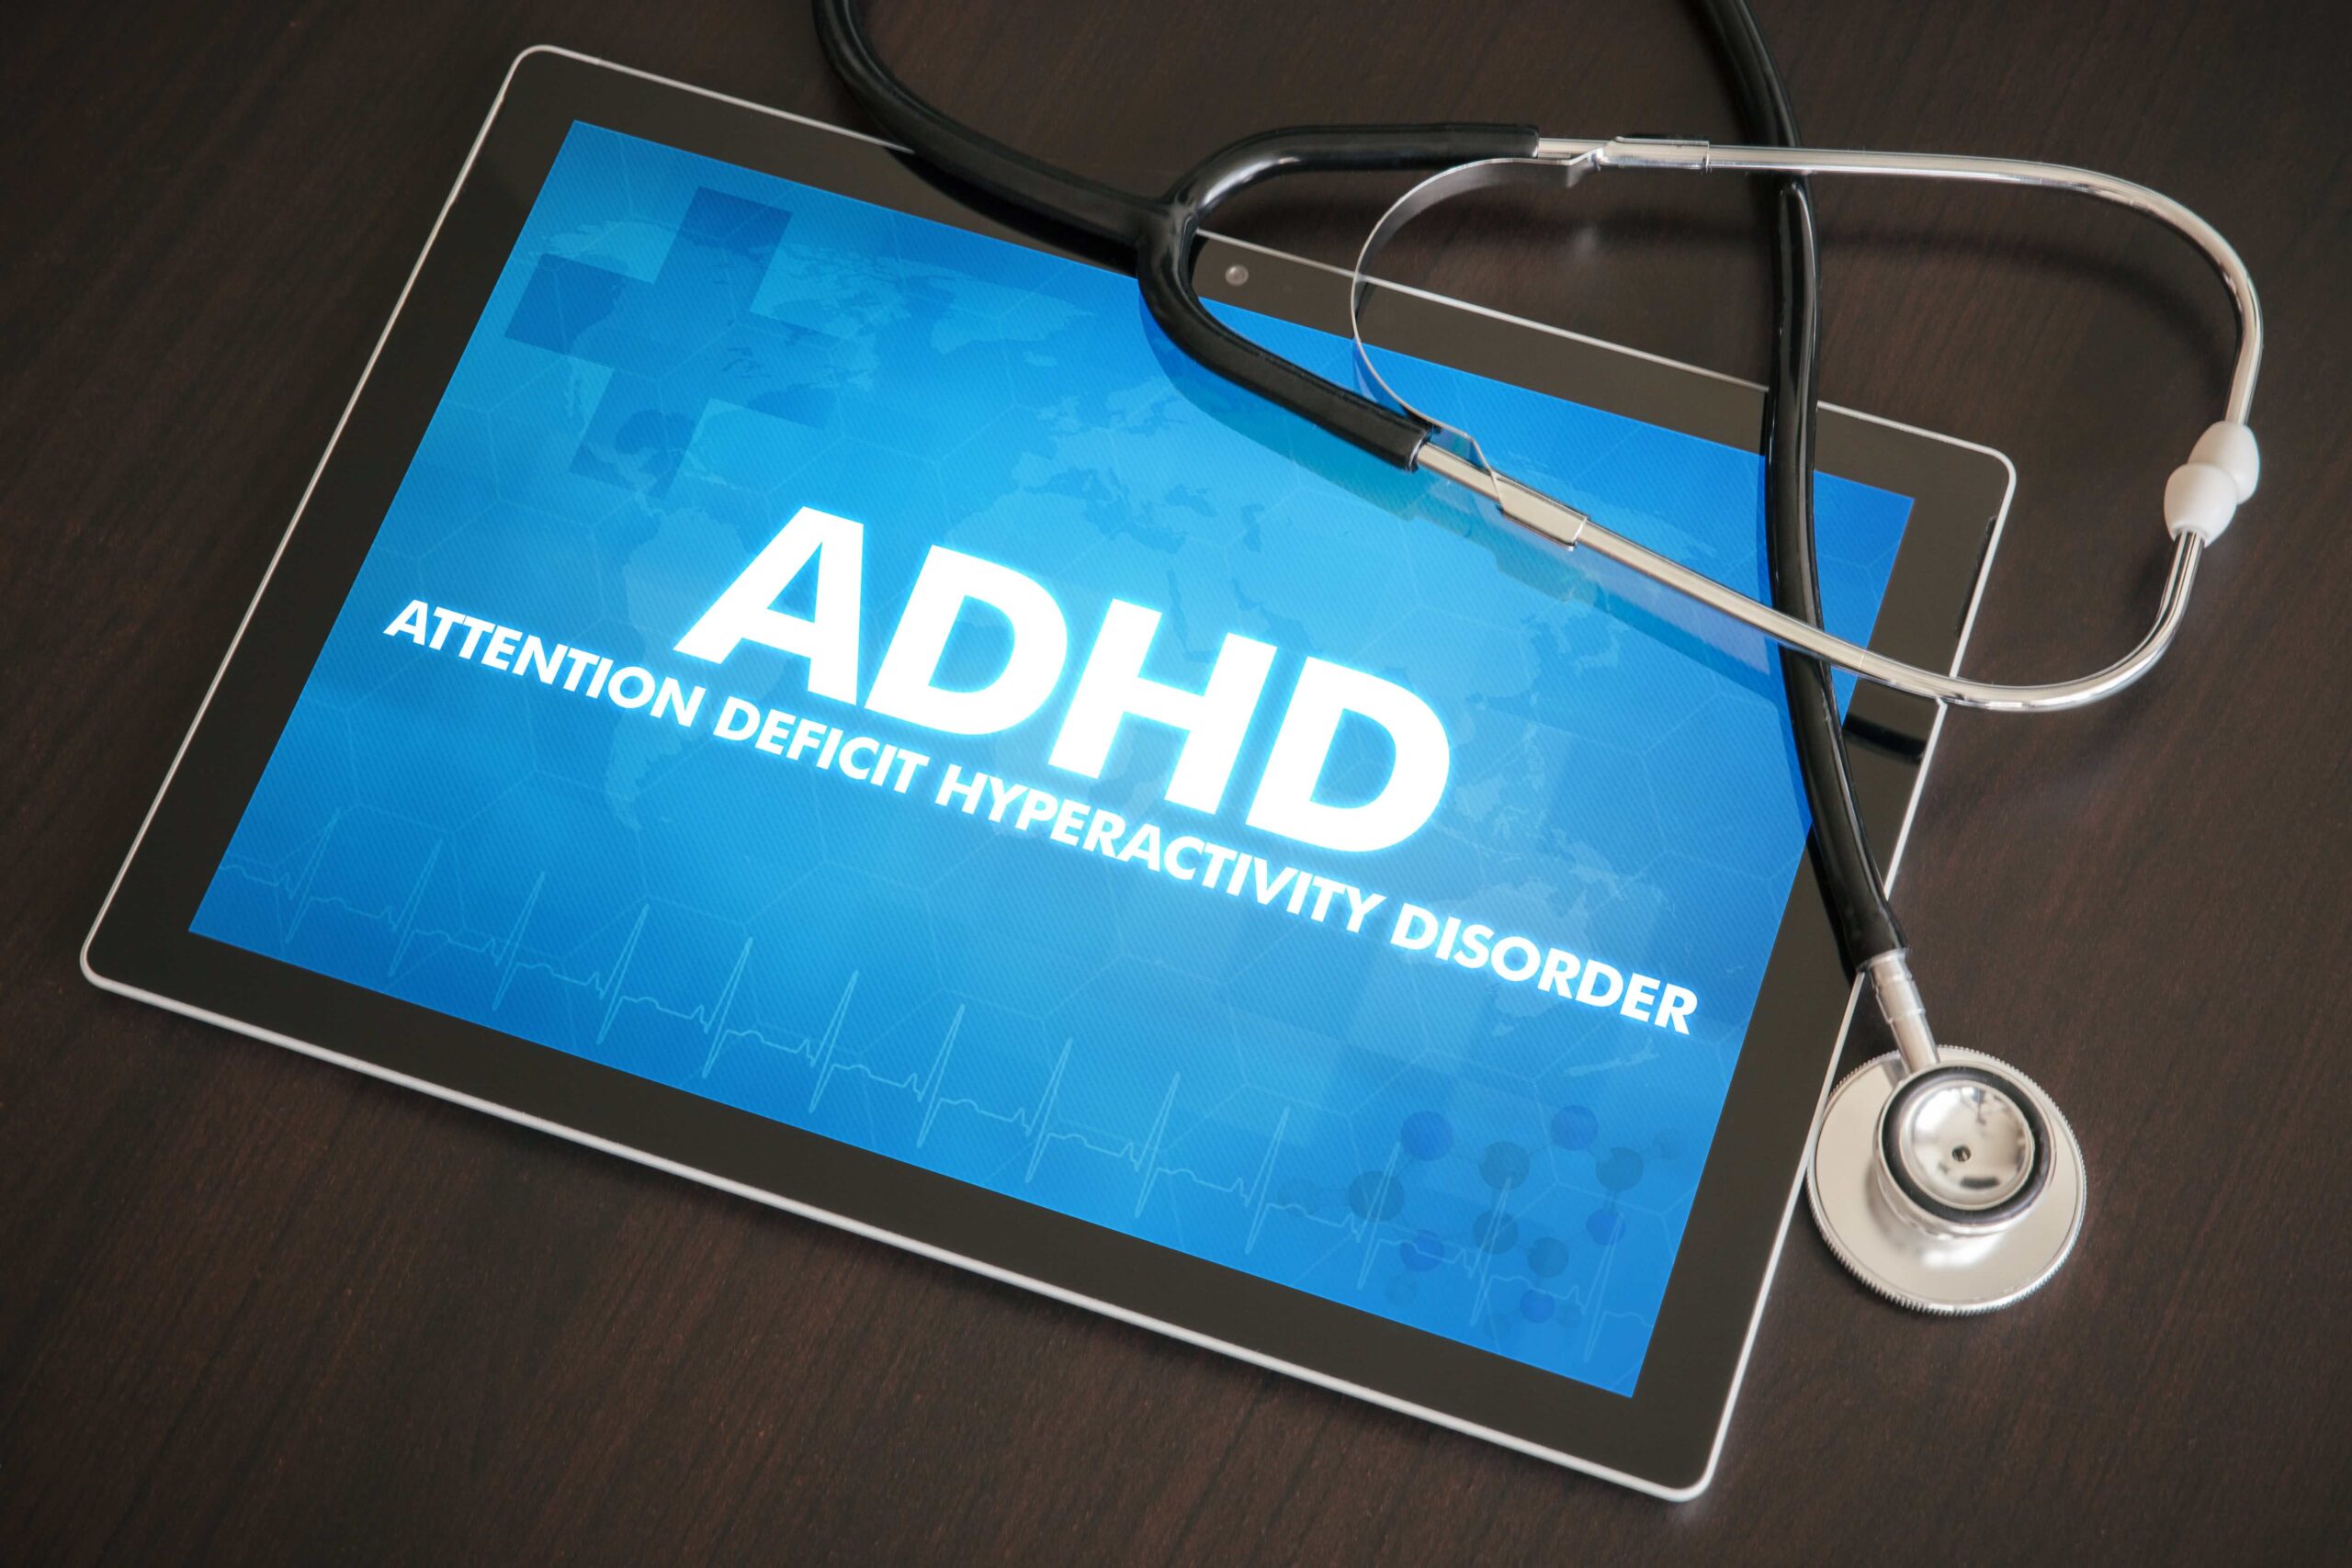 Attention Deficit Hyperactivity Disorder ADHD written on tablet